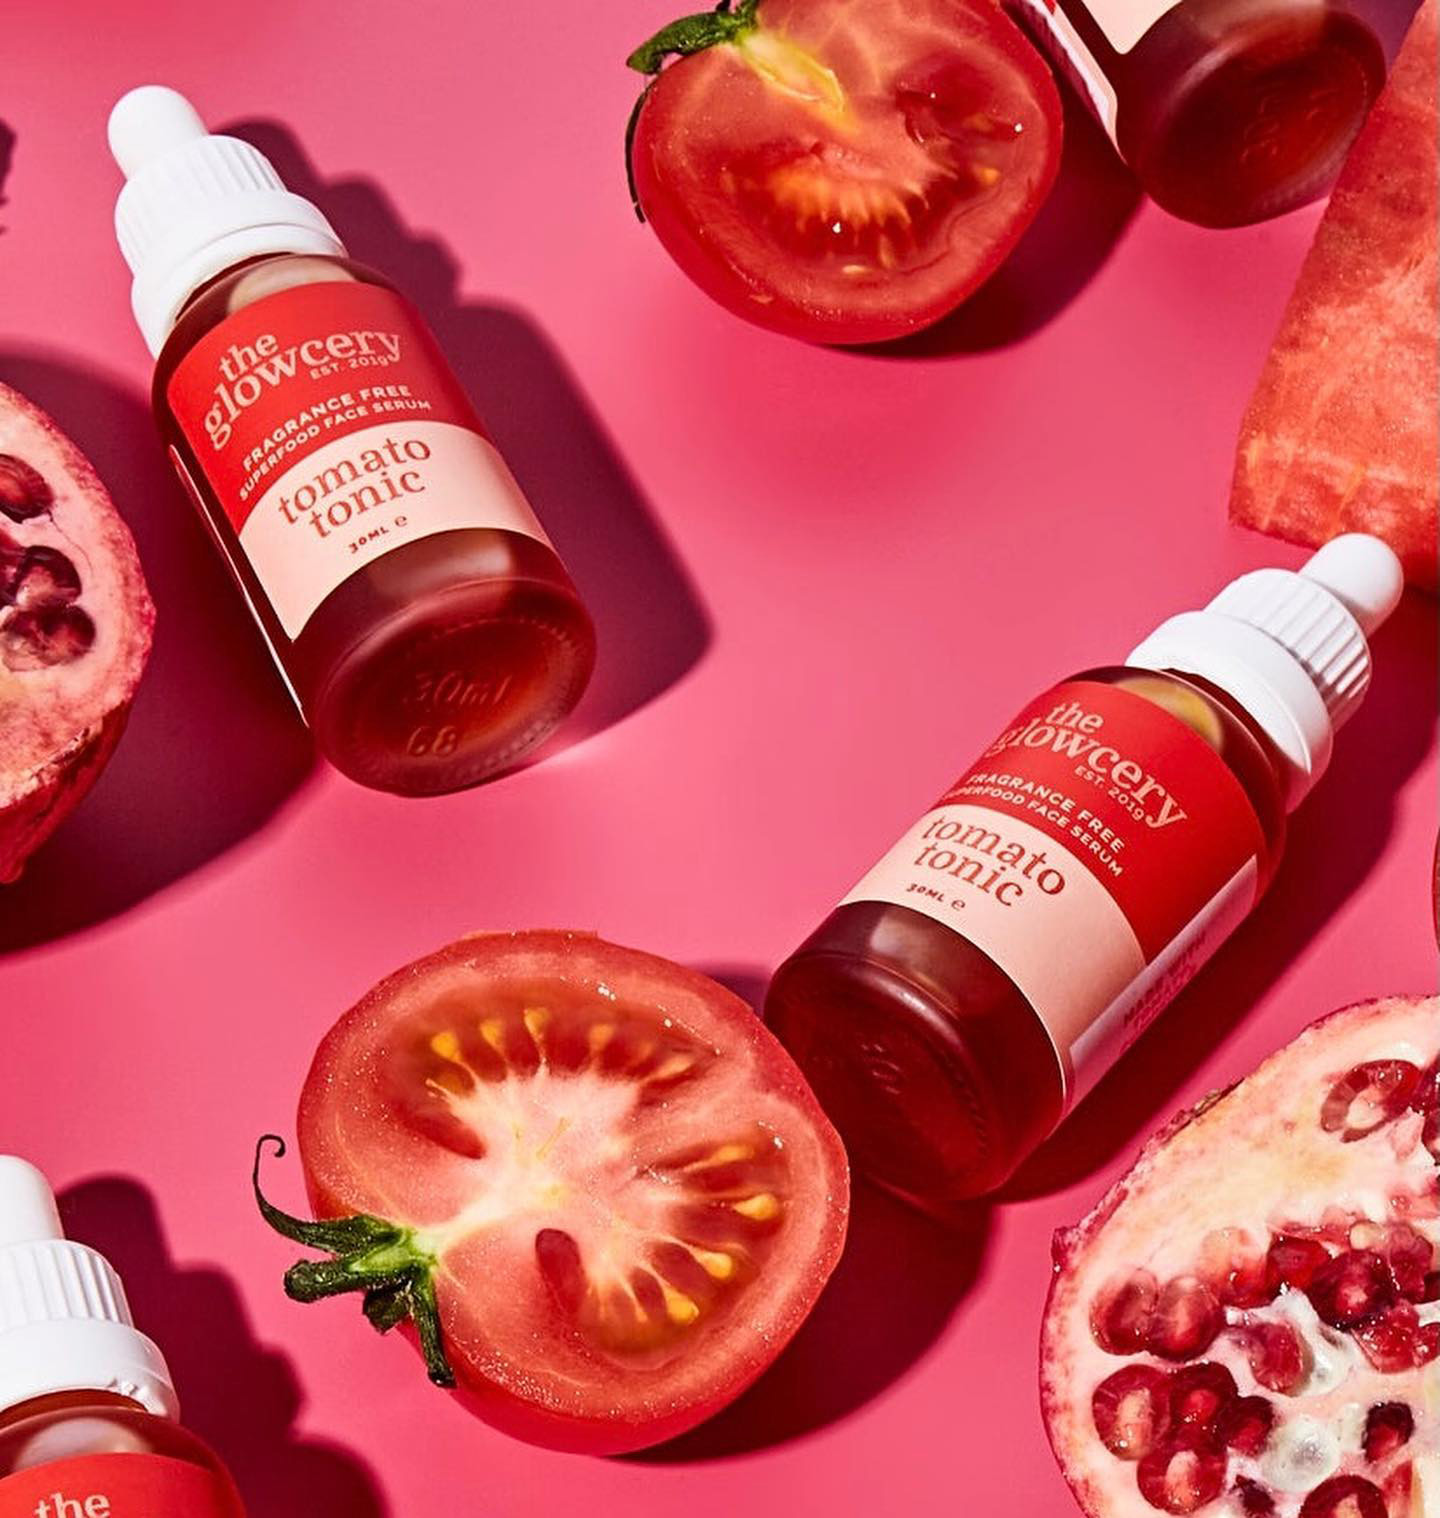 The Glowcery skincare products with pomegranate and tomatoes